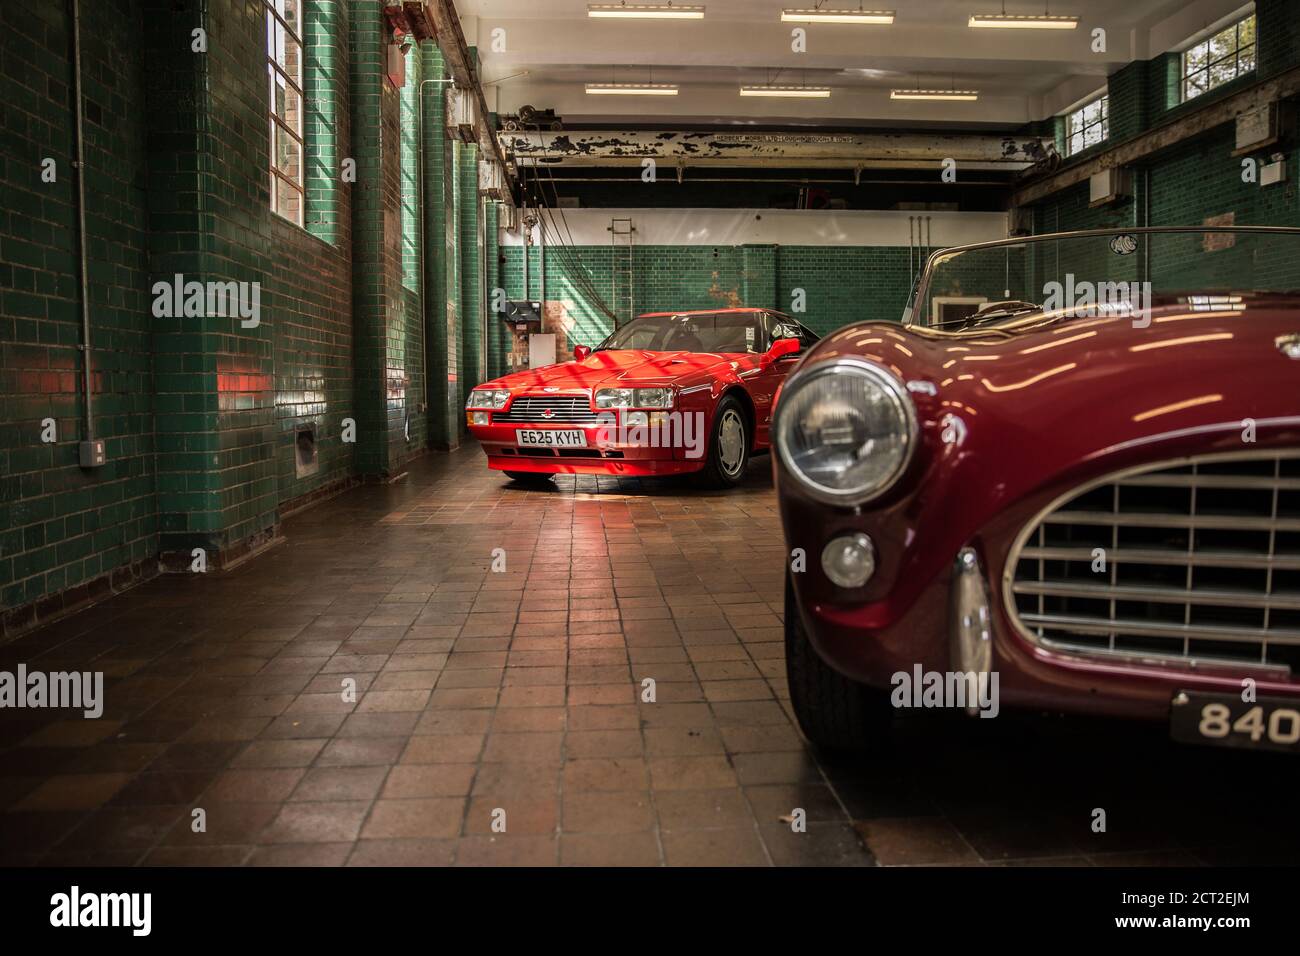 A 1985 Aston Martin V8 Zagato in red with an AC Ace Bristol in the foreground. Stock Photo